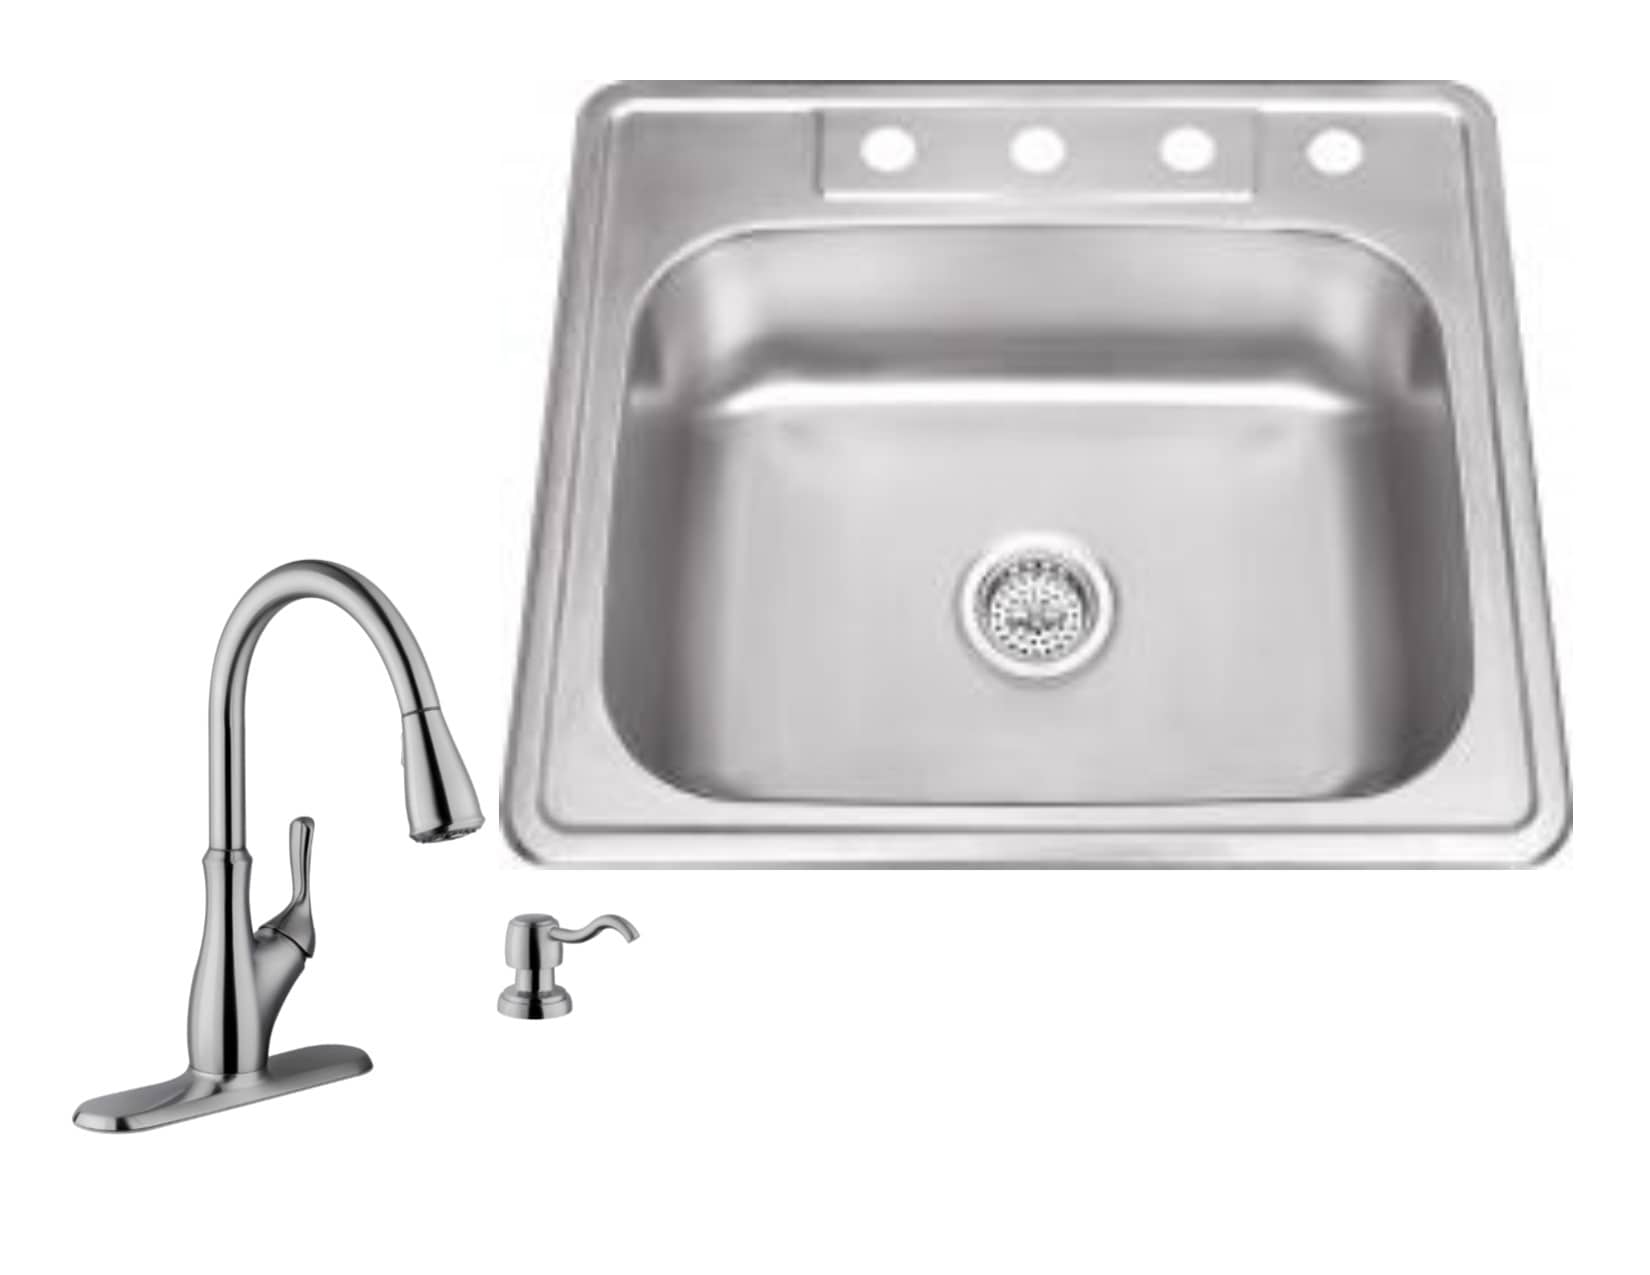 New Stainless Steel Single Bowl Kitchen Sink Comes With Waste & Pluming Kit Set 